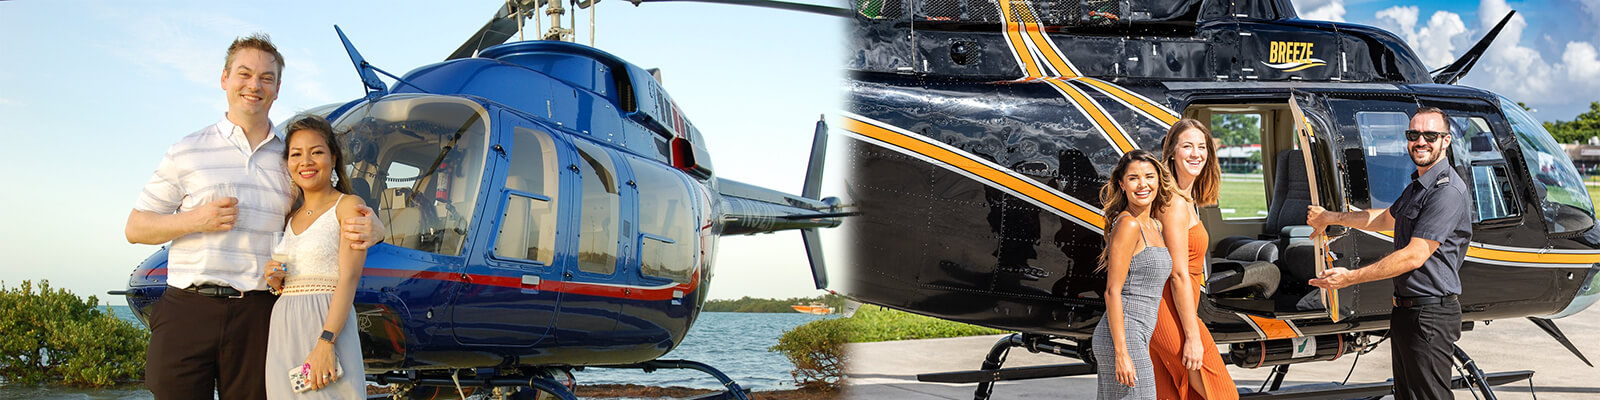 Breeze Helicopter Miami Coupons